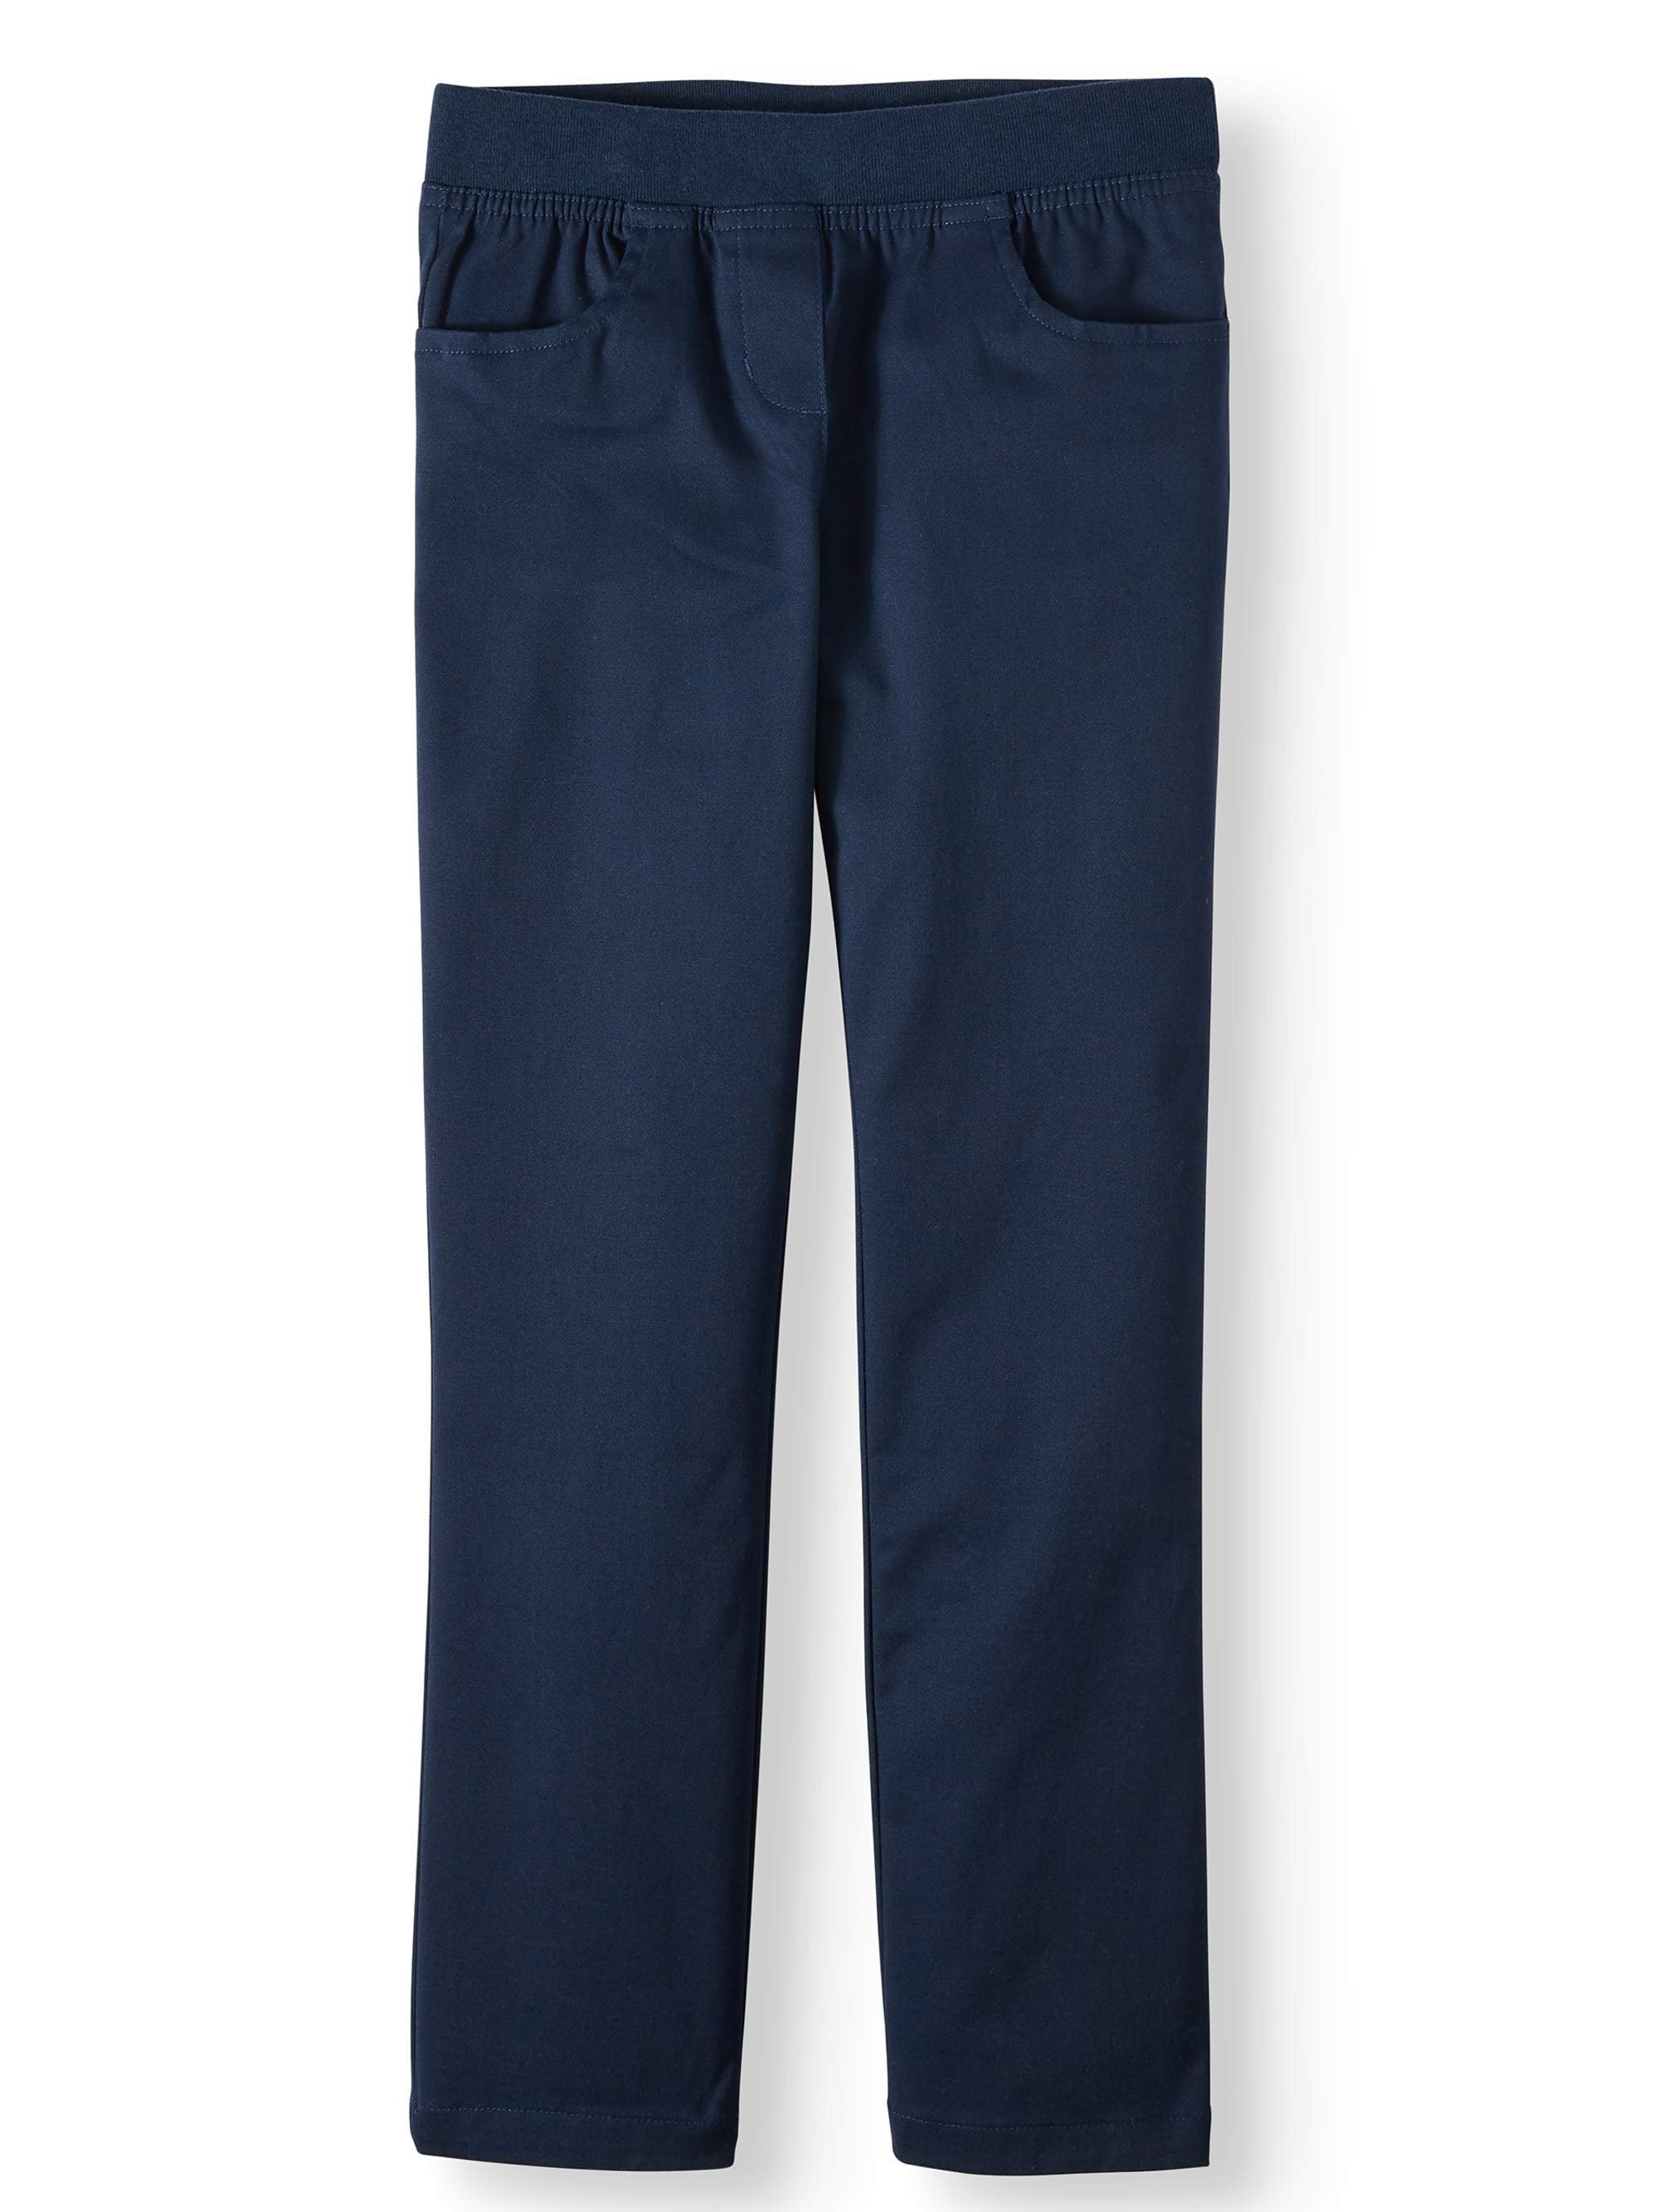 More Styles Available Genuine School Uniform Girls' Twill Pant 